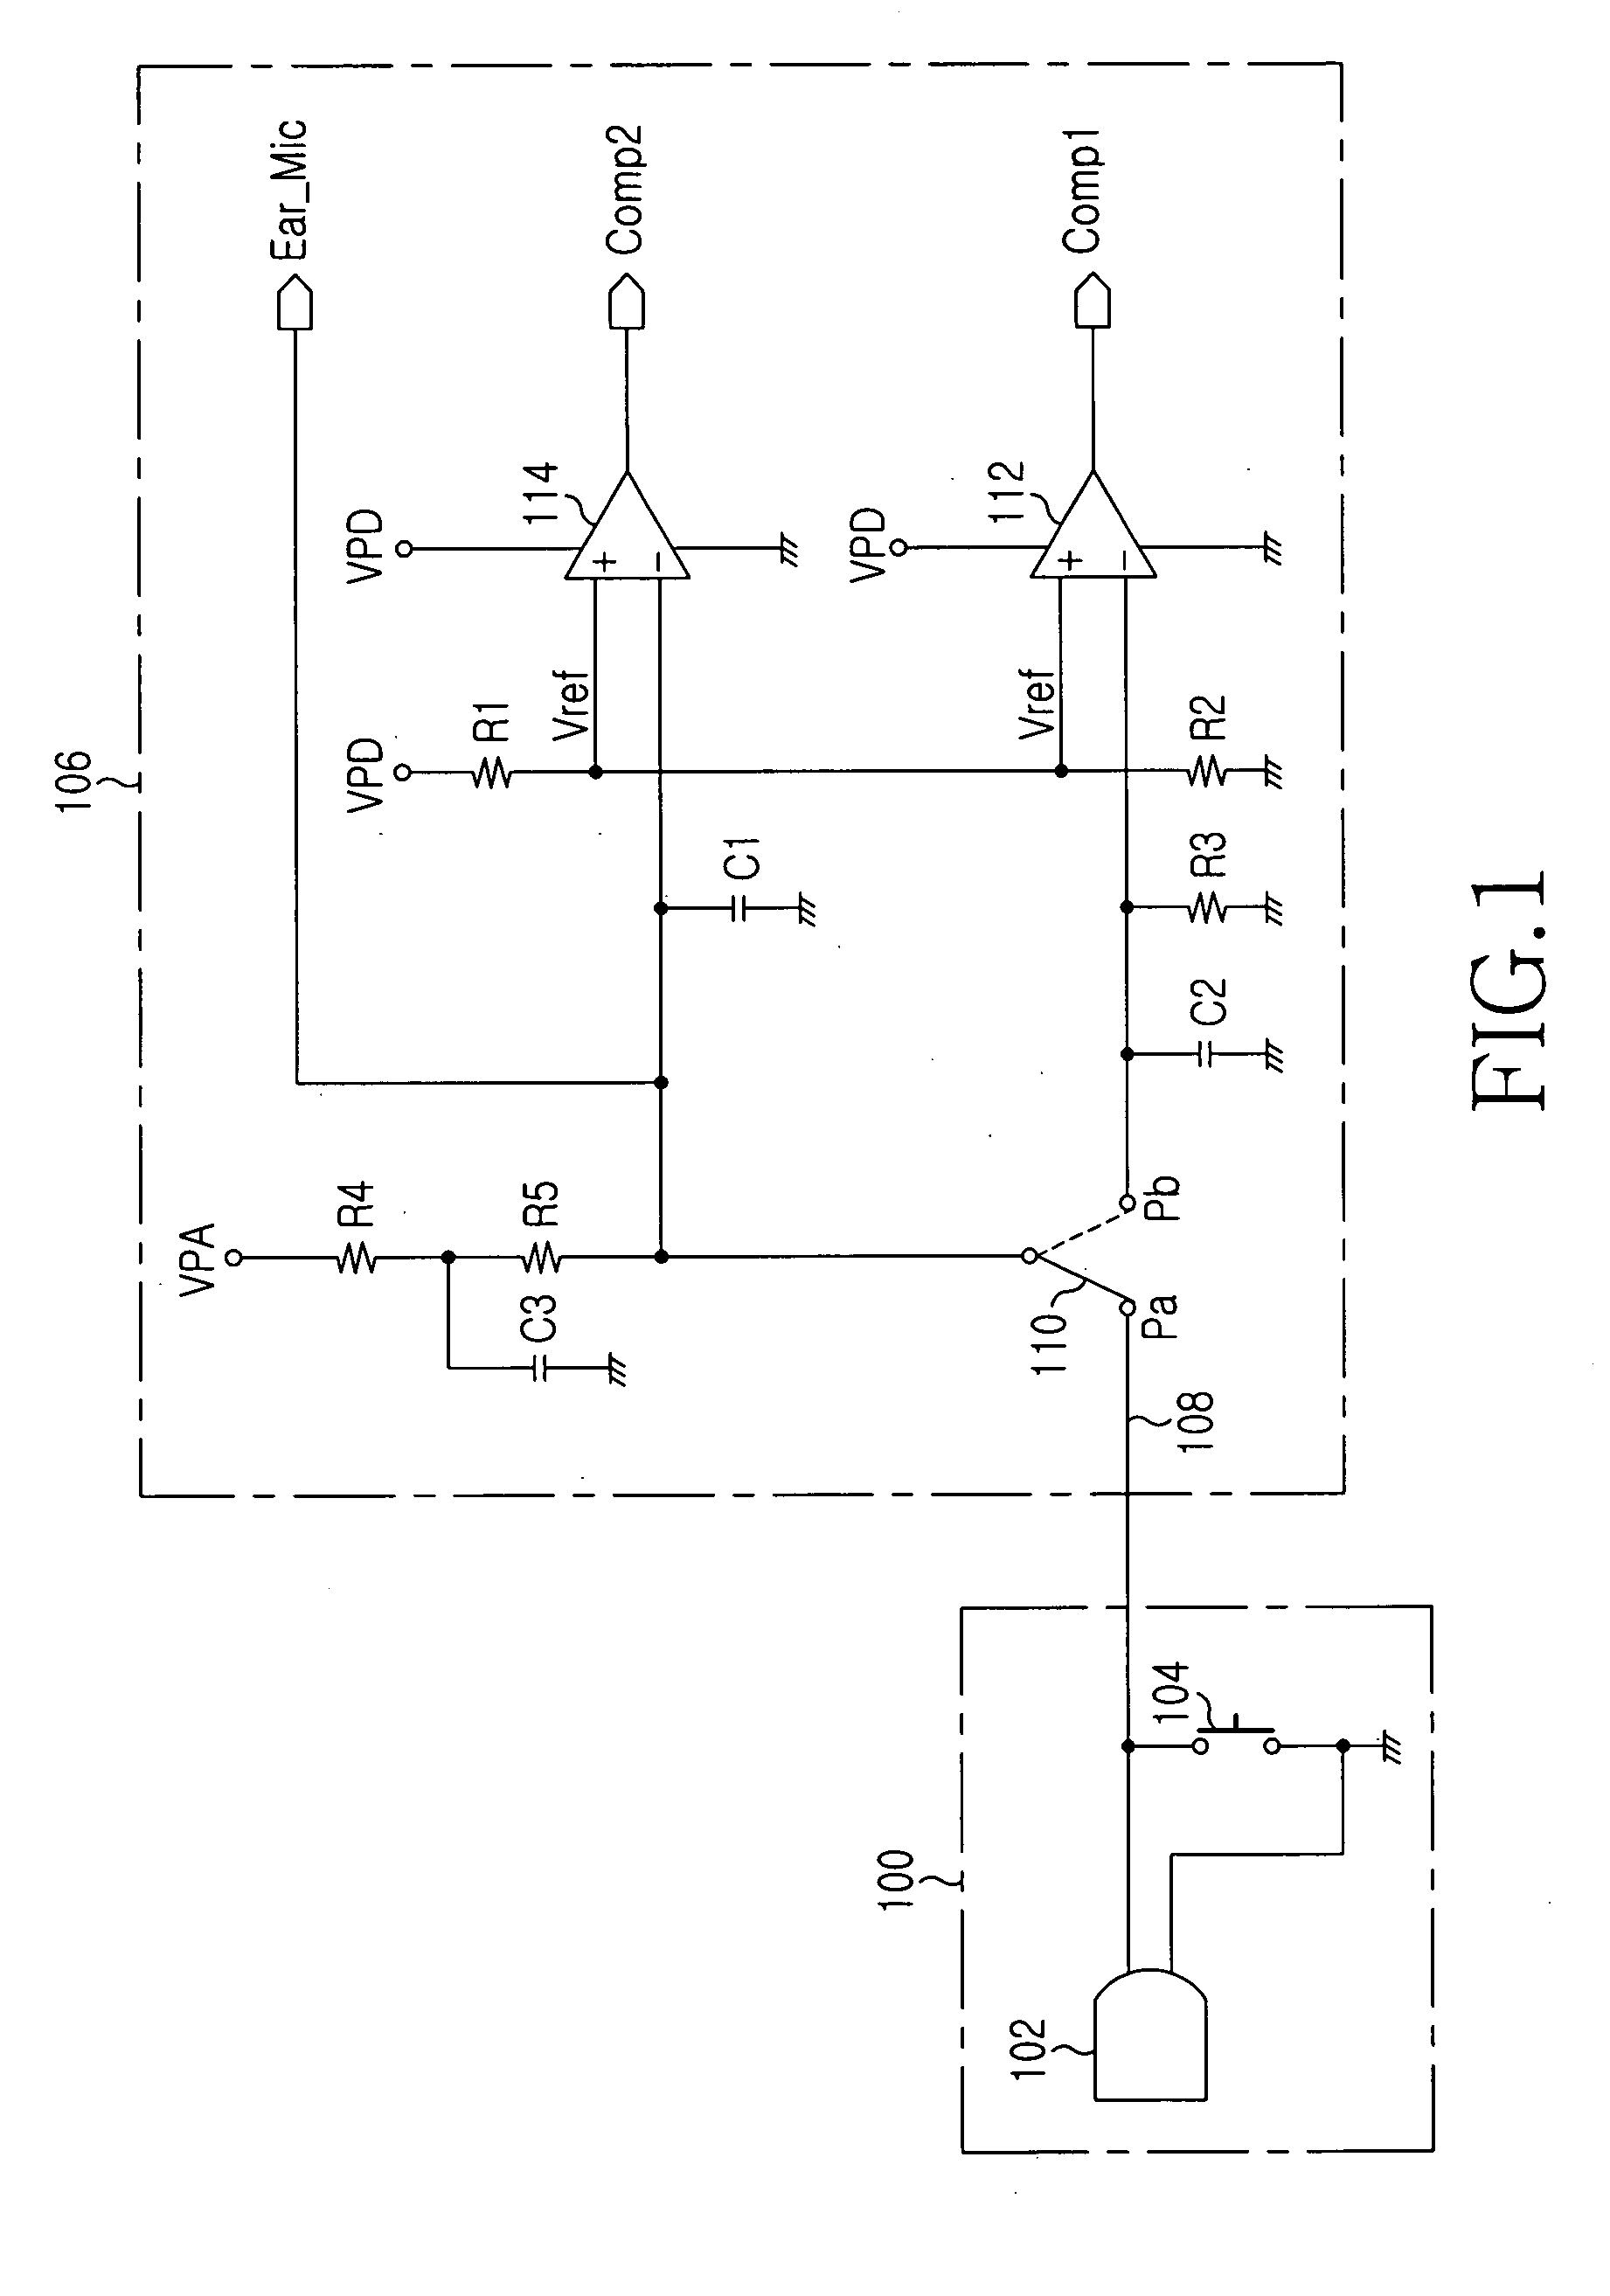 Circuit for supplying ear-microphone bias power for ear/microphone in mobile terminal